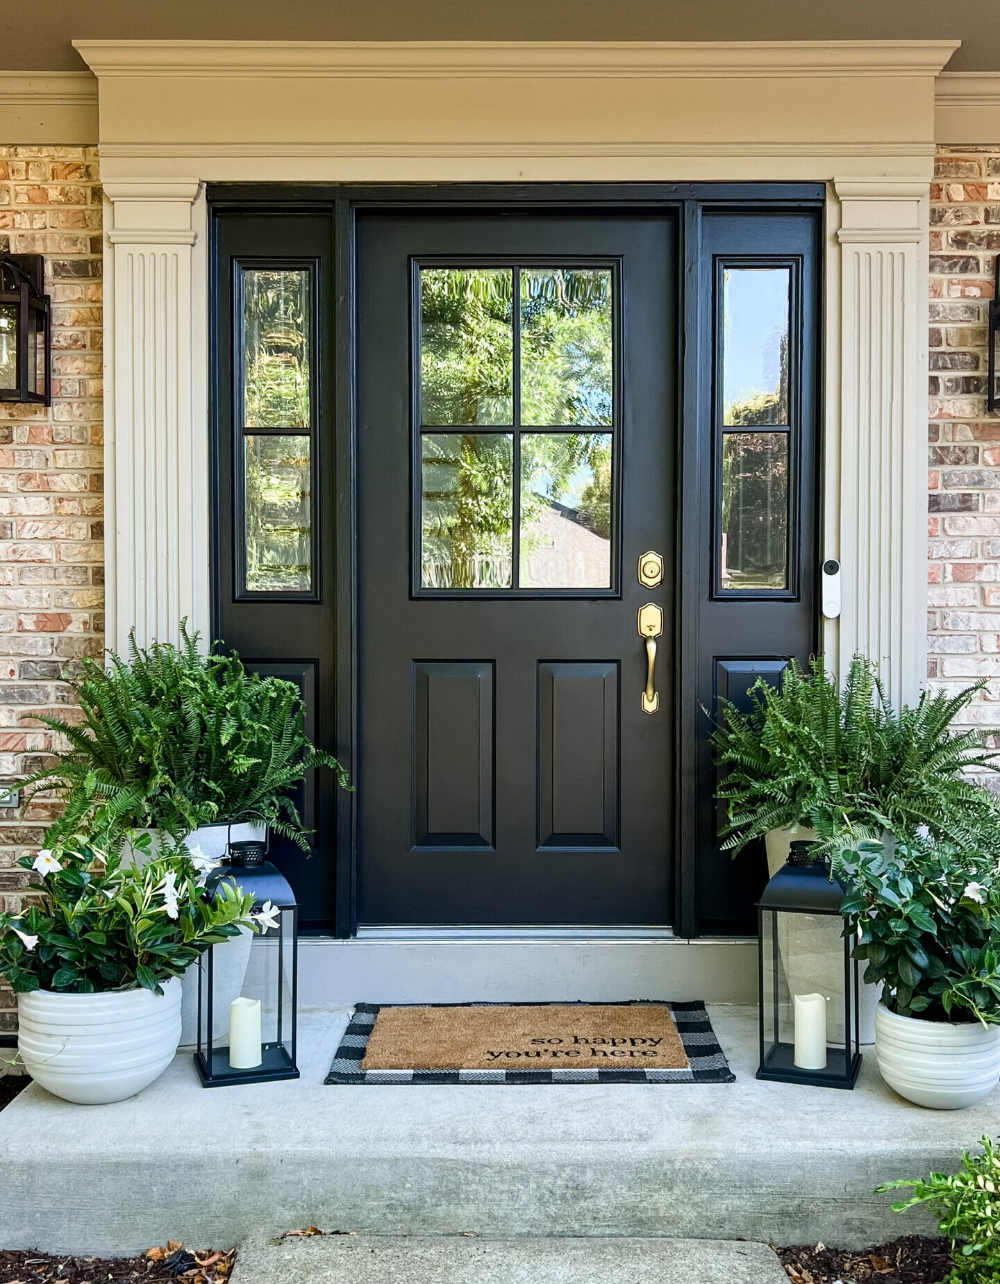 Choosing the Perfect Entry Door for Your
Home